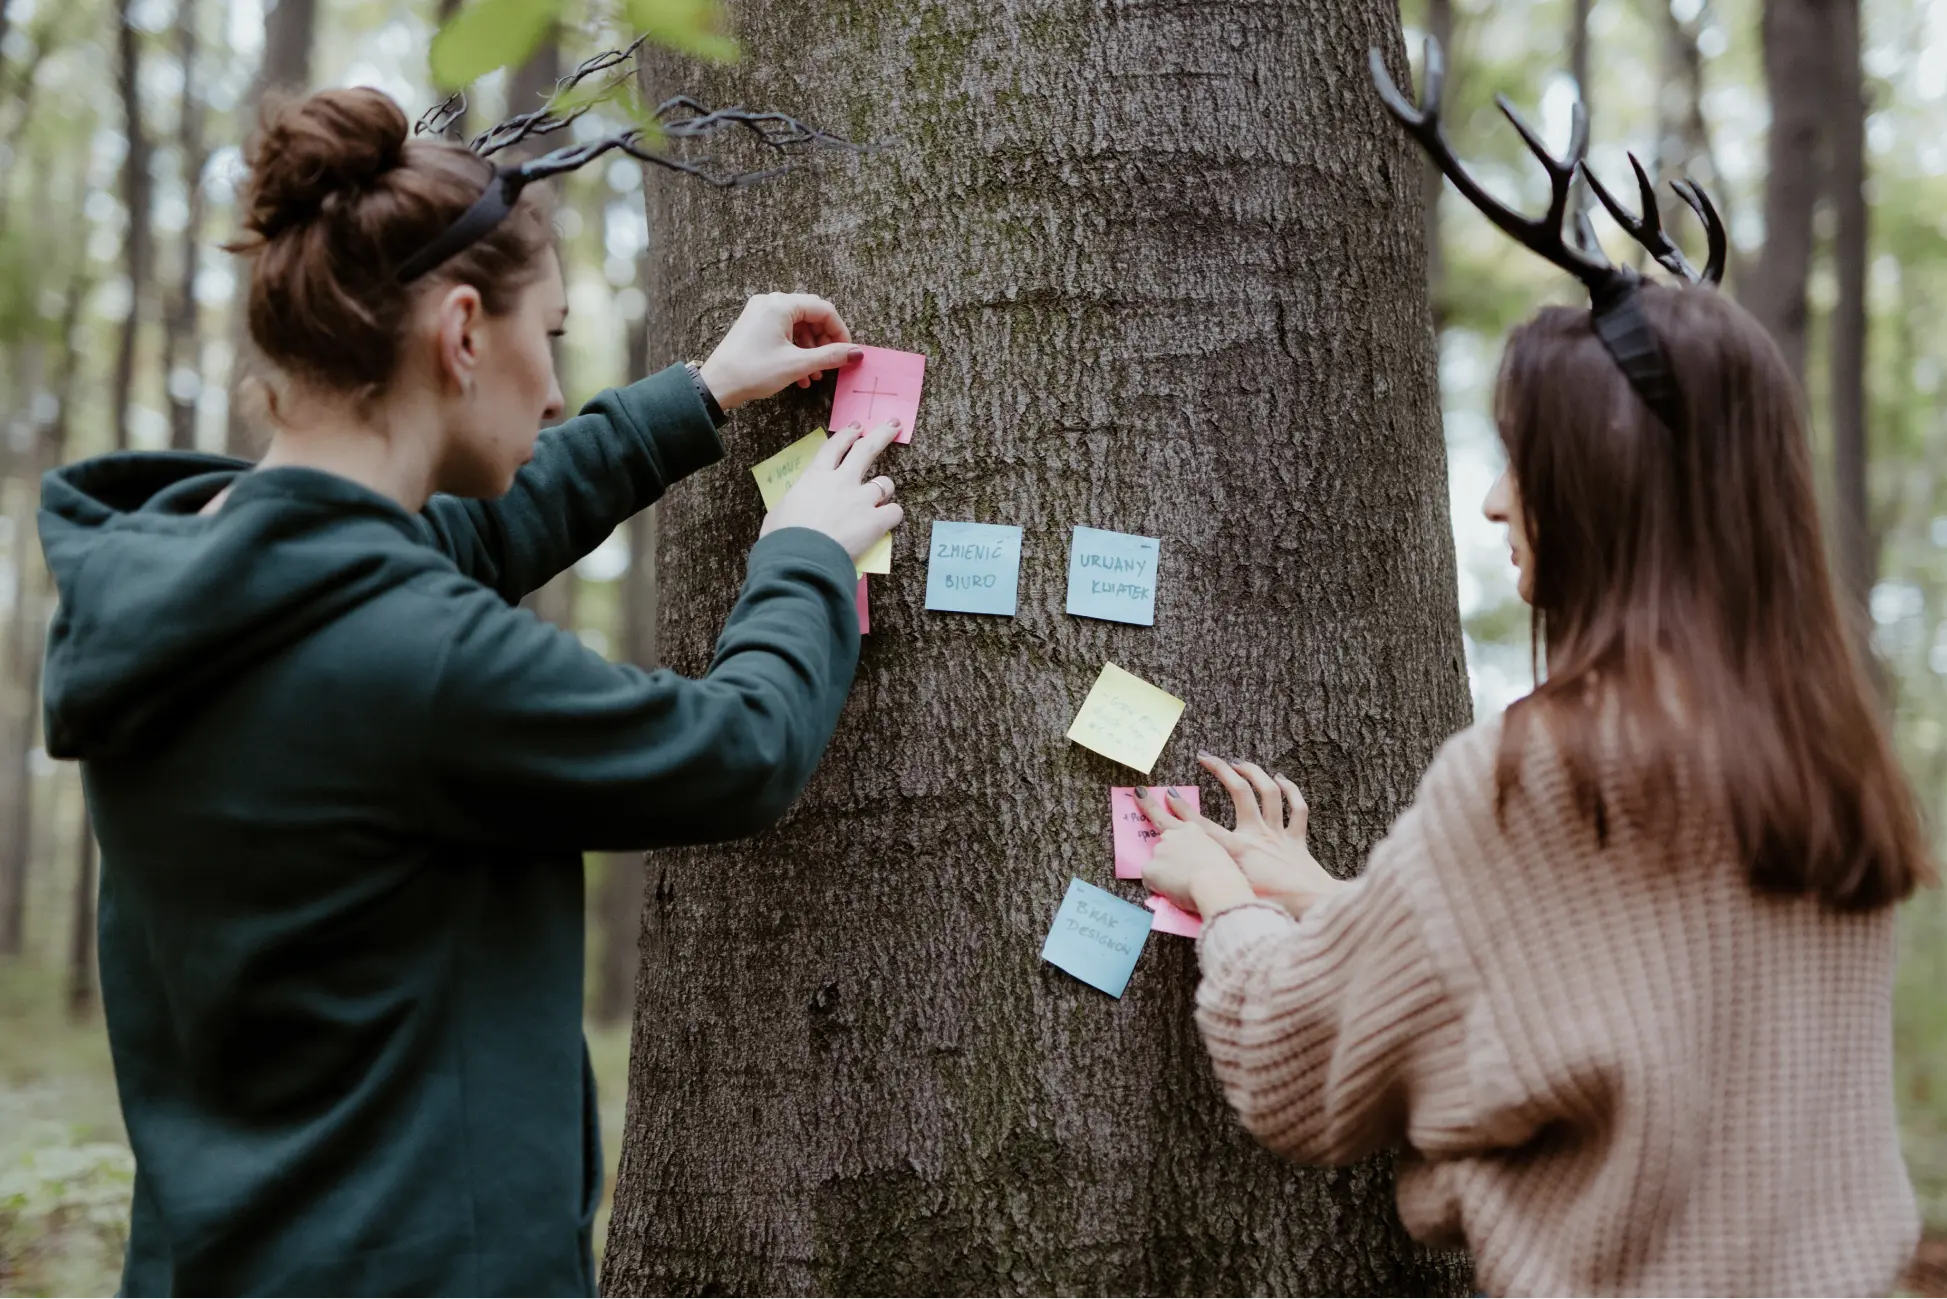 Two women plan a workshop in the forest, pinning sticky notes to a large tree in the middle. They have their backs to the camera, focused on the task at hand. They have antlers on their heads.